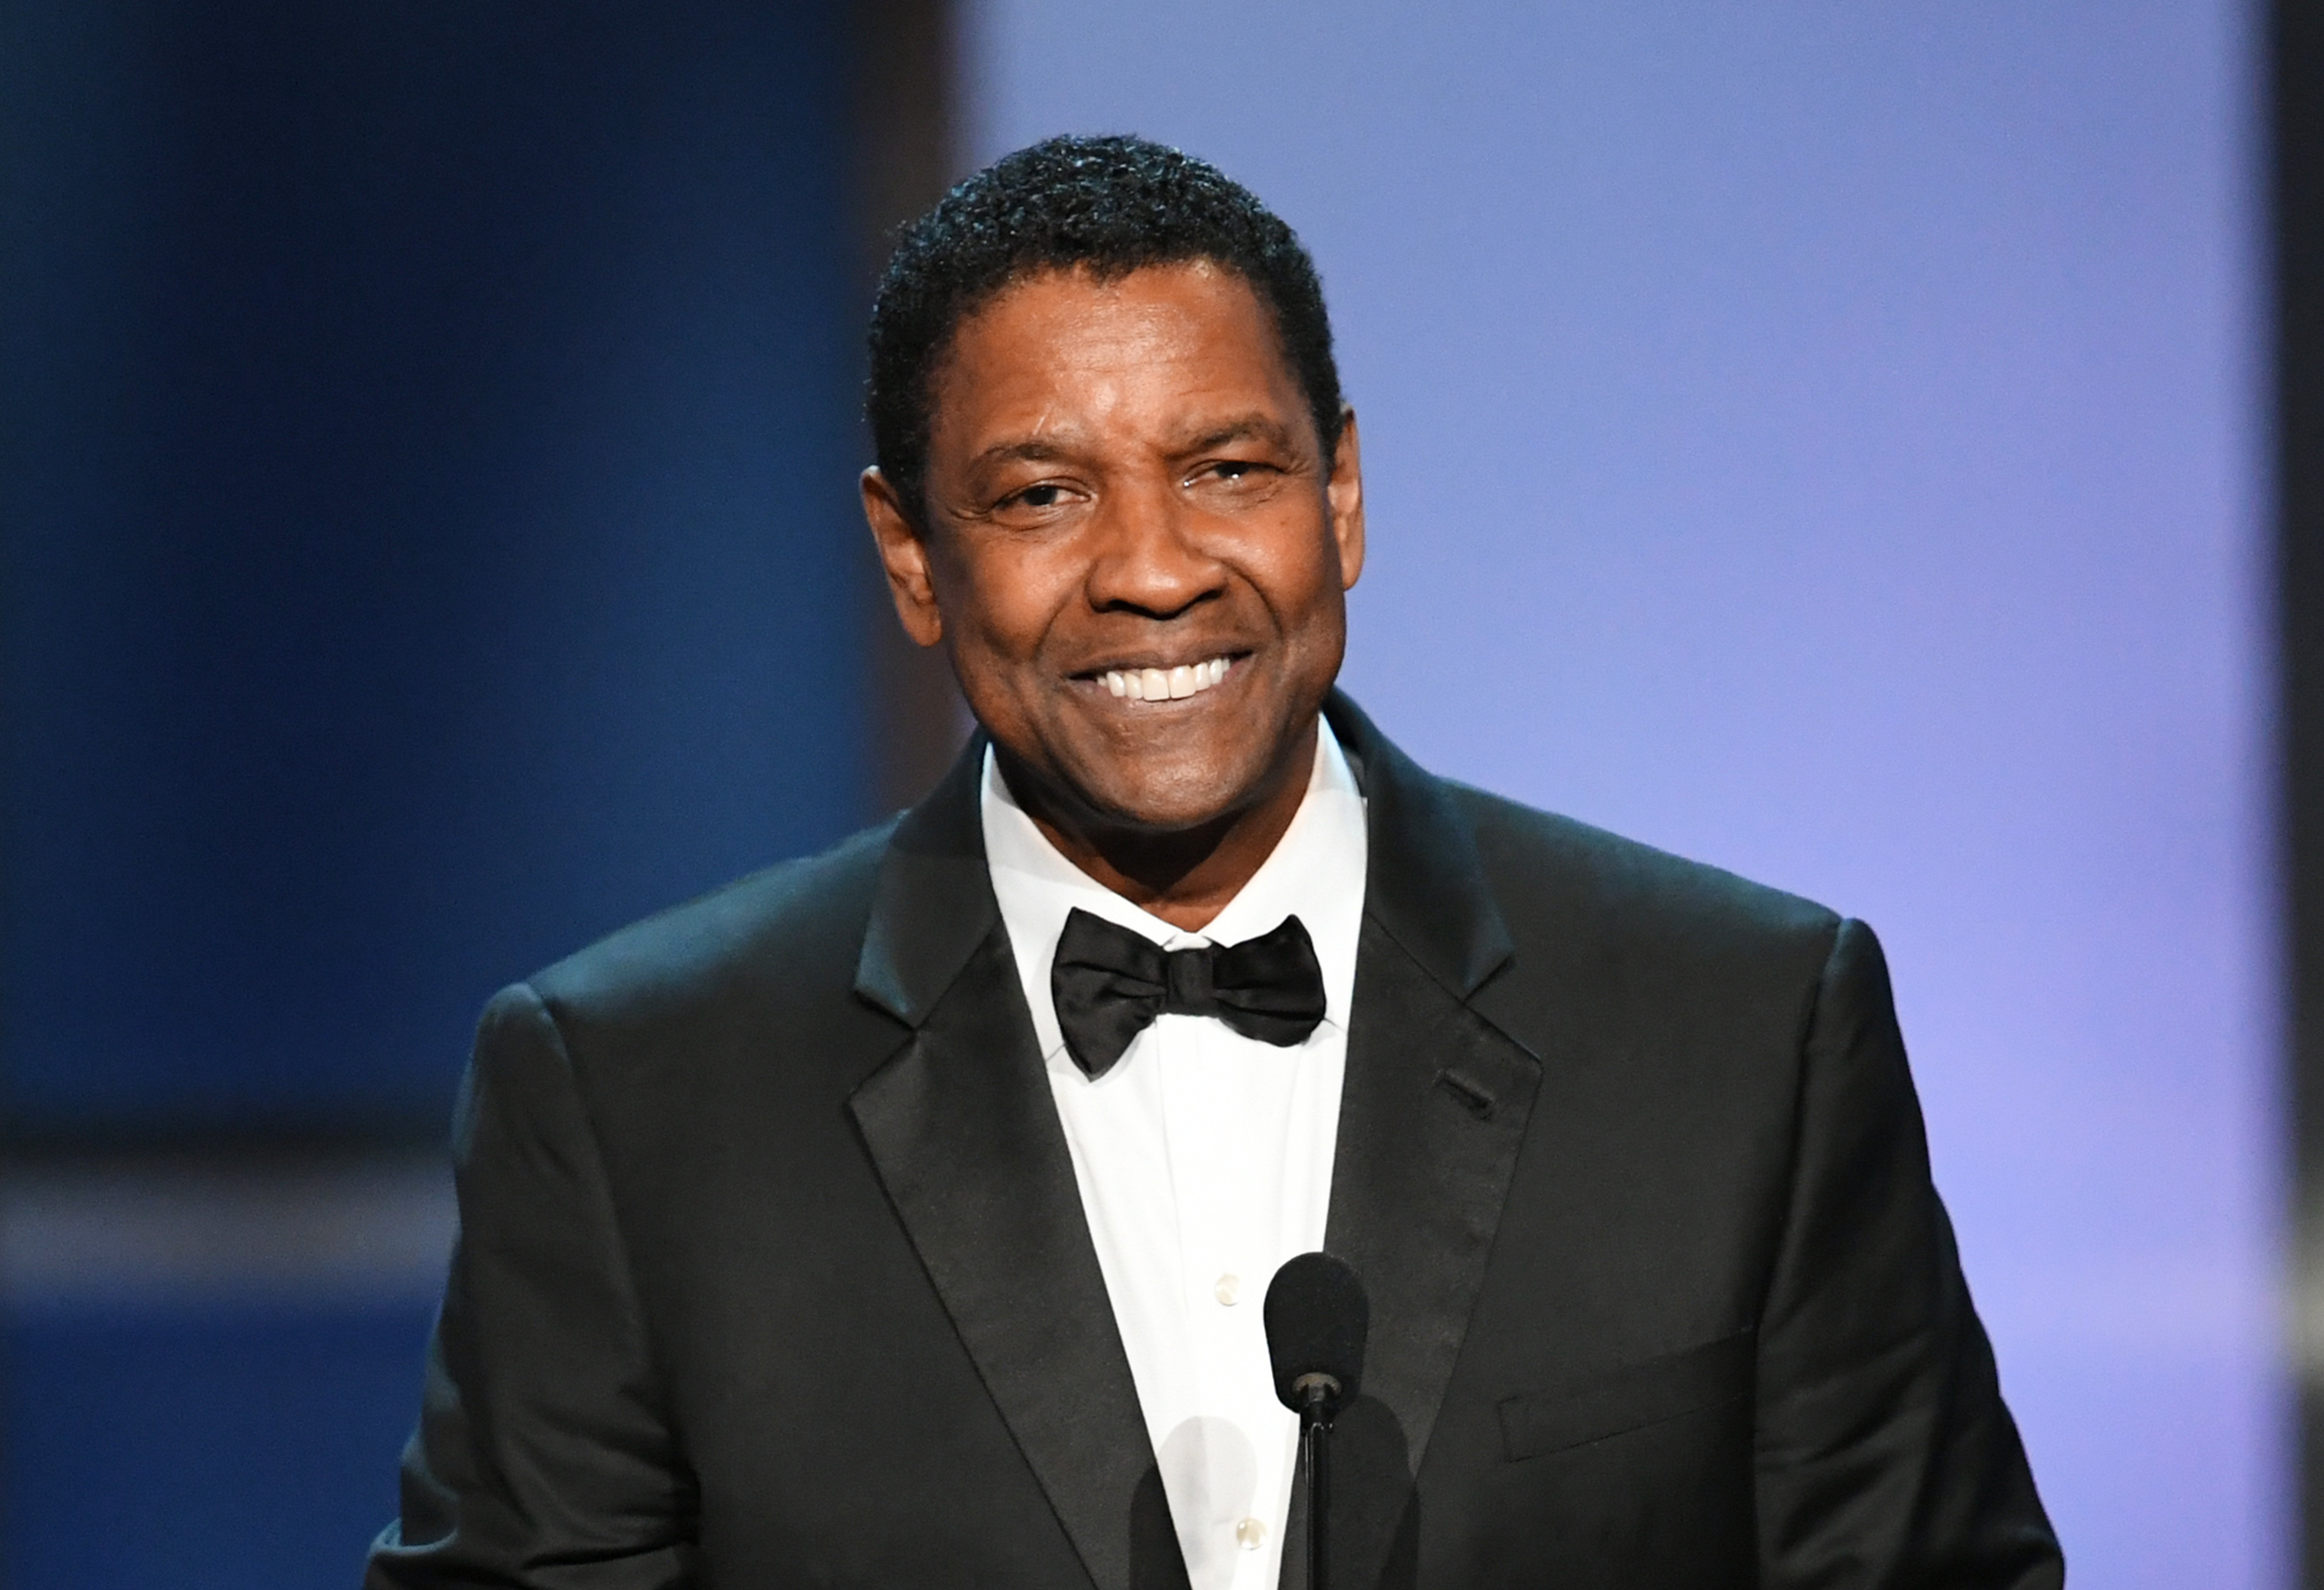 Denzel Washington. who owns mansions in Beverly Hills and New York, speaks onstage during the 47th AFI Life Achievement Award